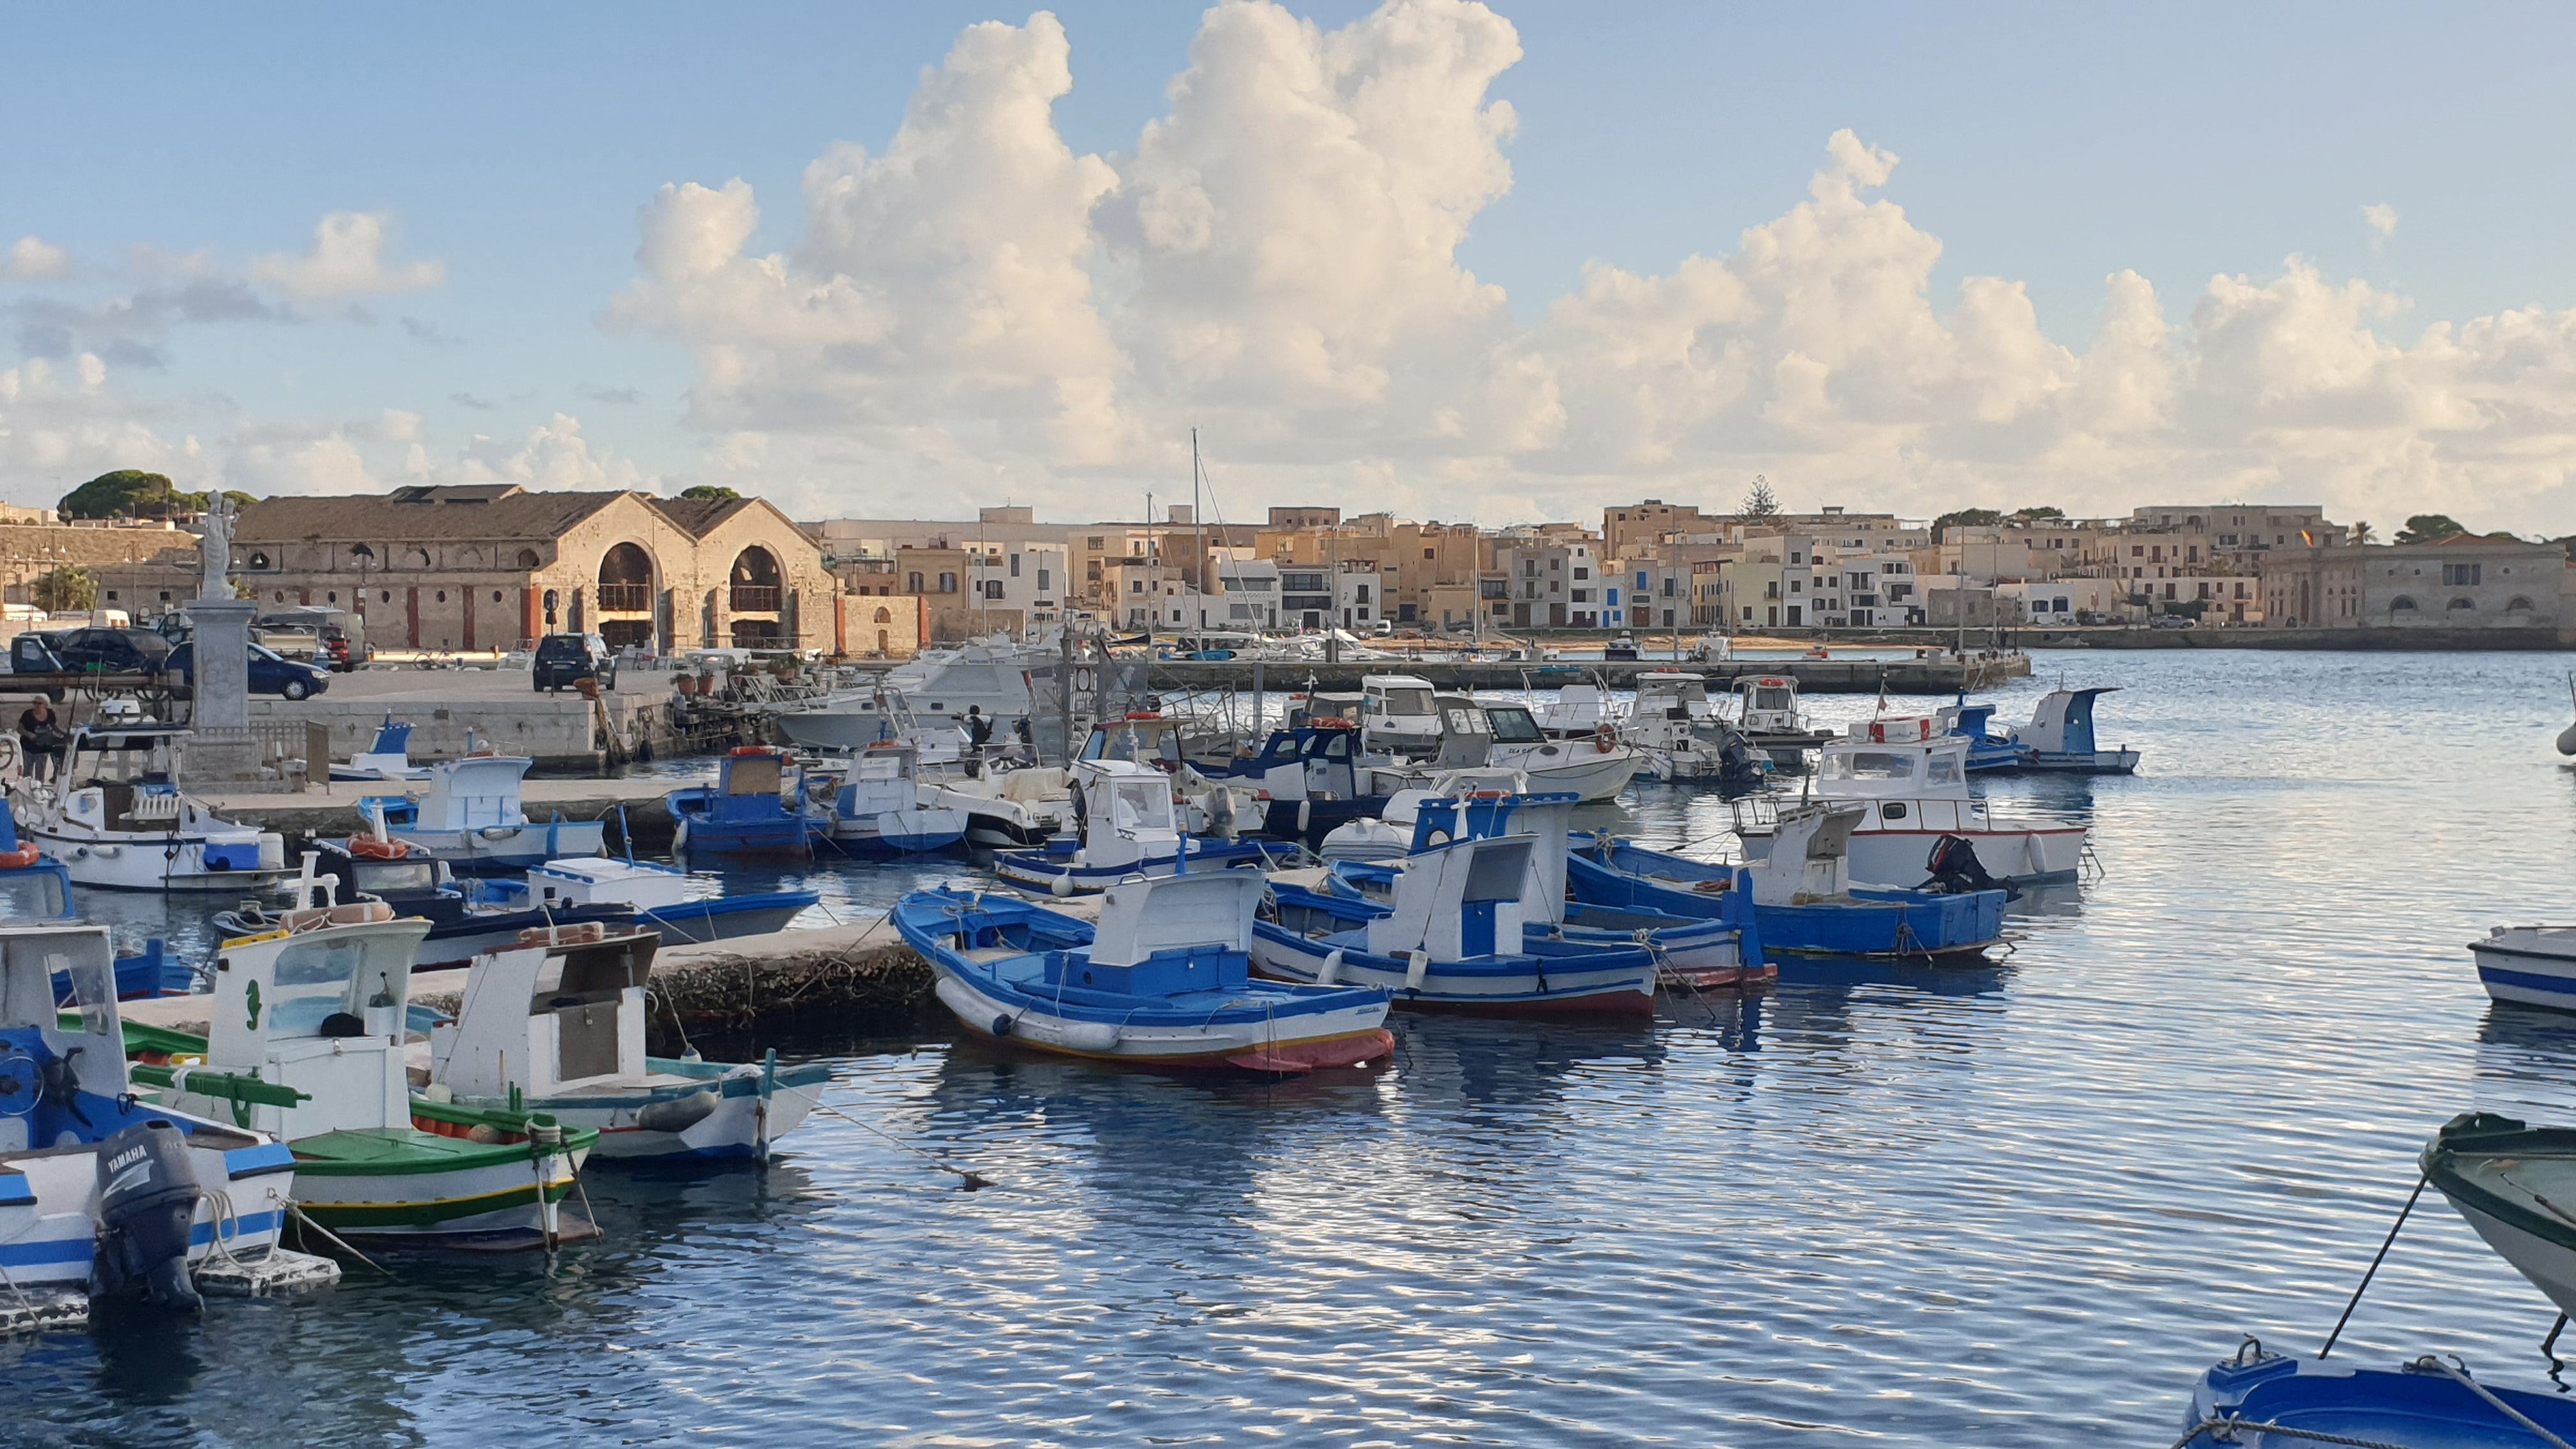 Fishing boats at Favignana Harbour (thought to be the ‘island full of wonders’ in the ‘Odyssey’)